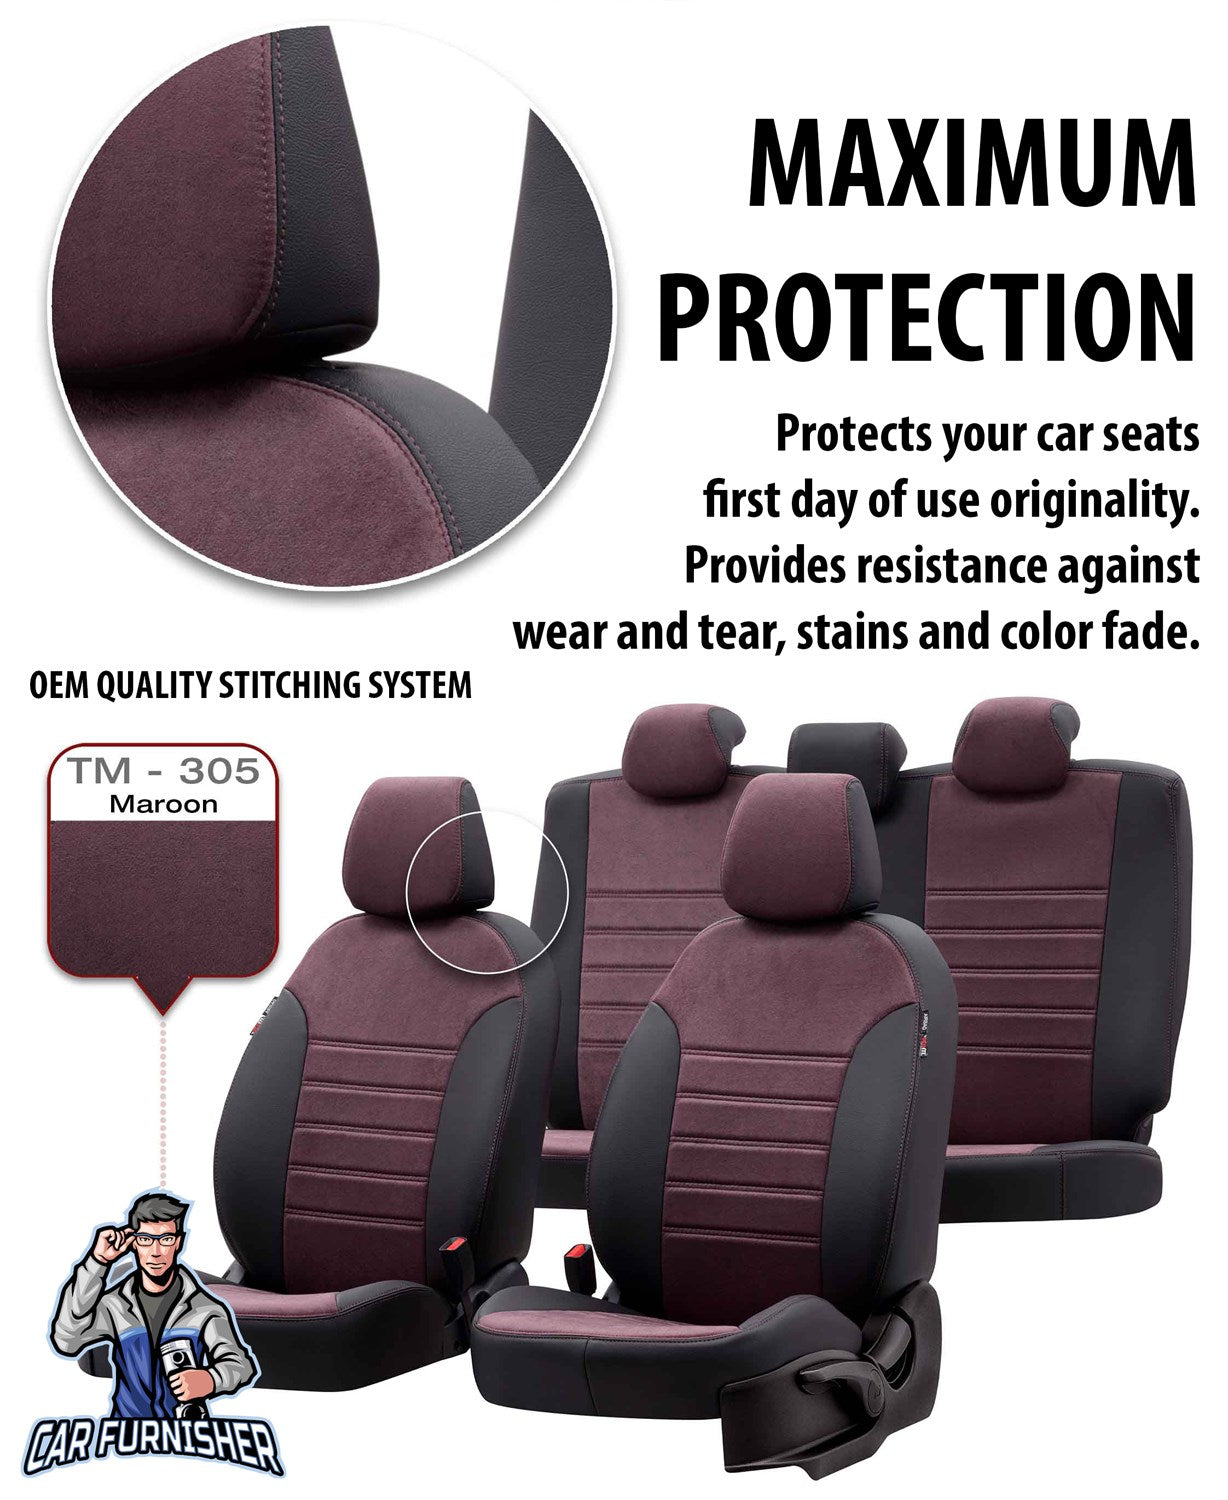 Dodge Nitro Seat Cover Milano Suede Design Smoked Black Leather & Suede Fabric